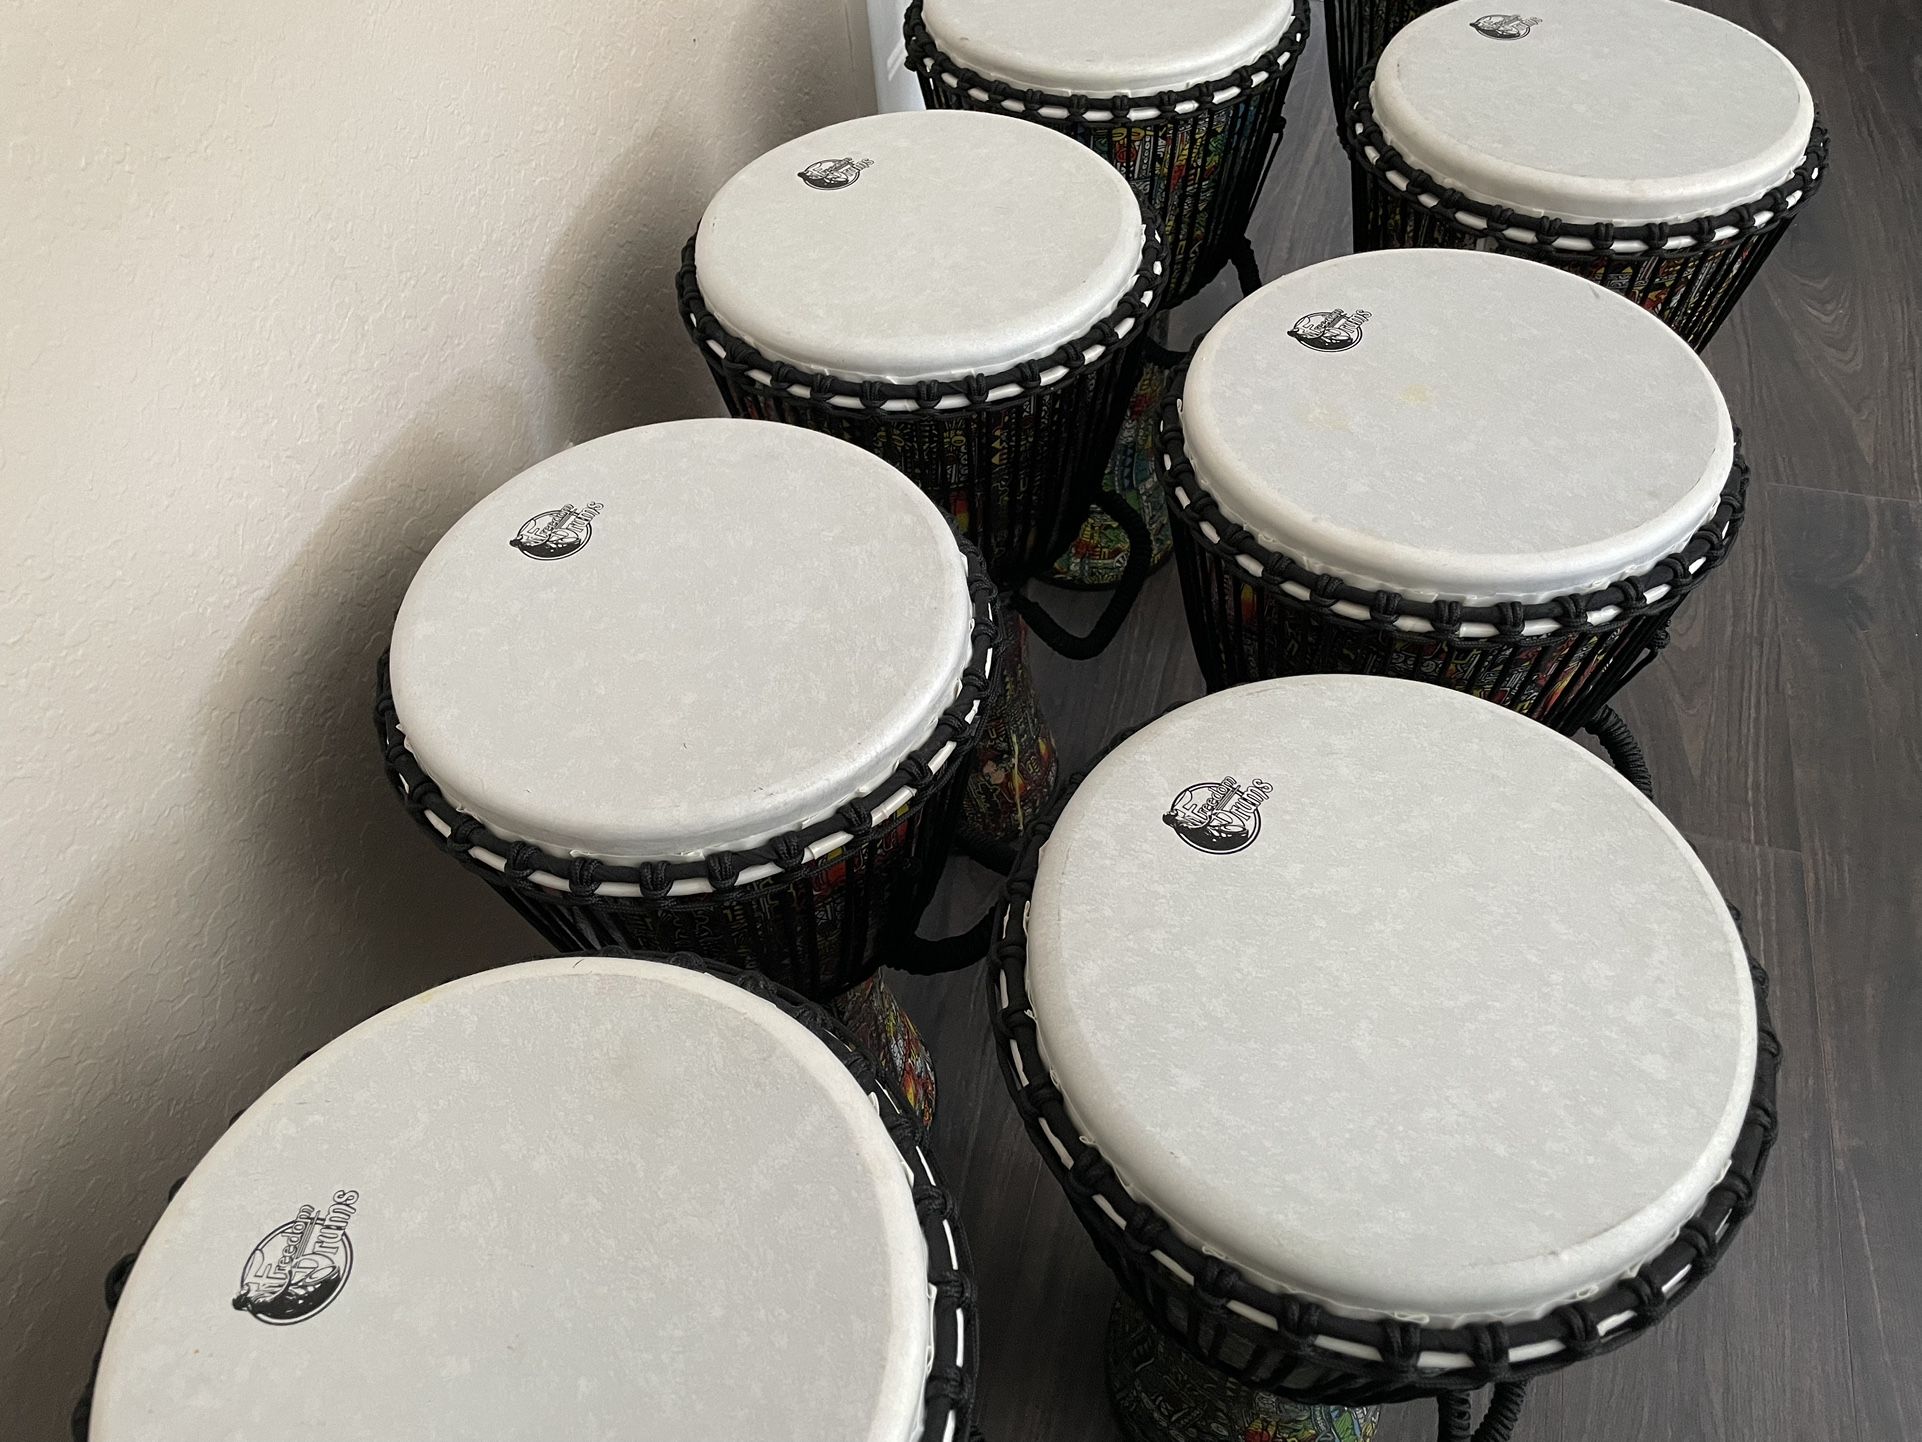 Set Of 8 12” Head Djembe Drums For Drum Circles, Therapy Classes, And More